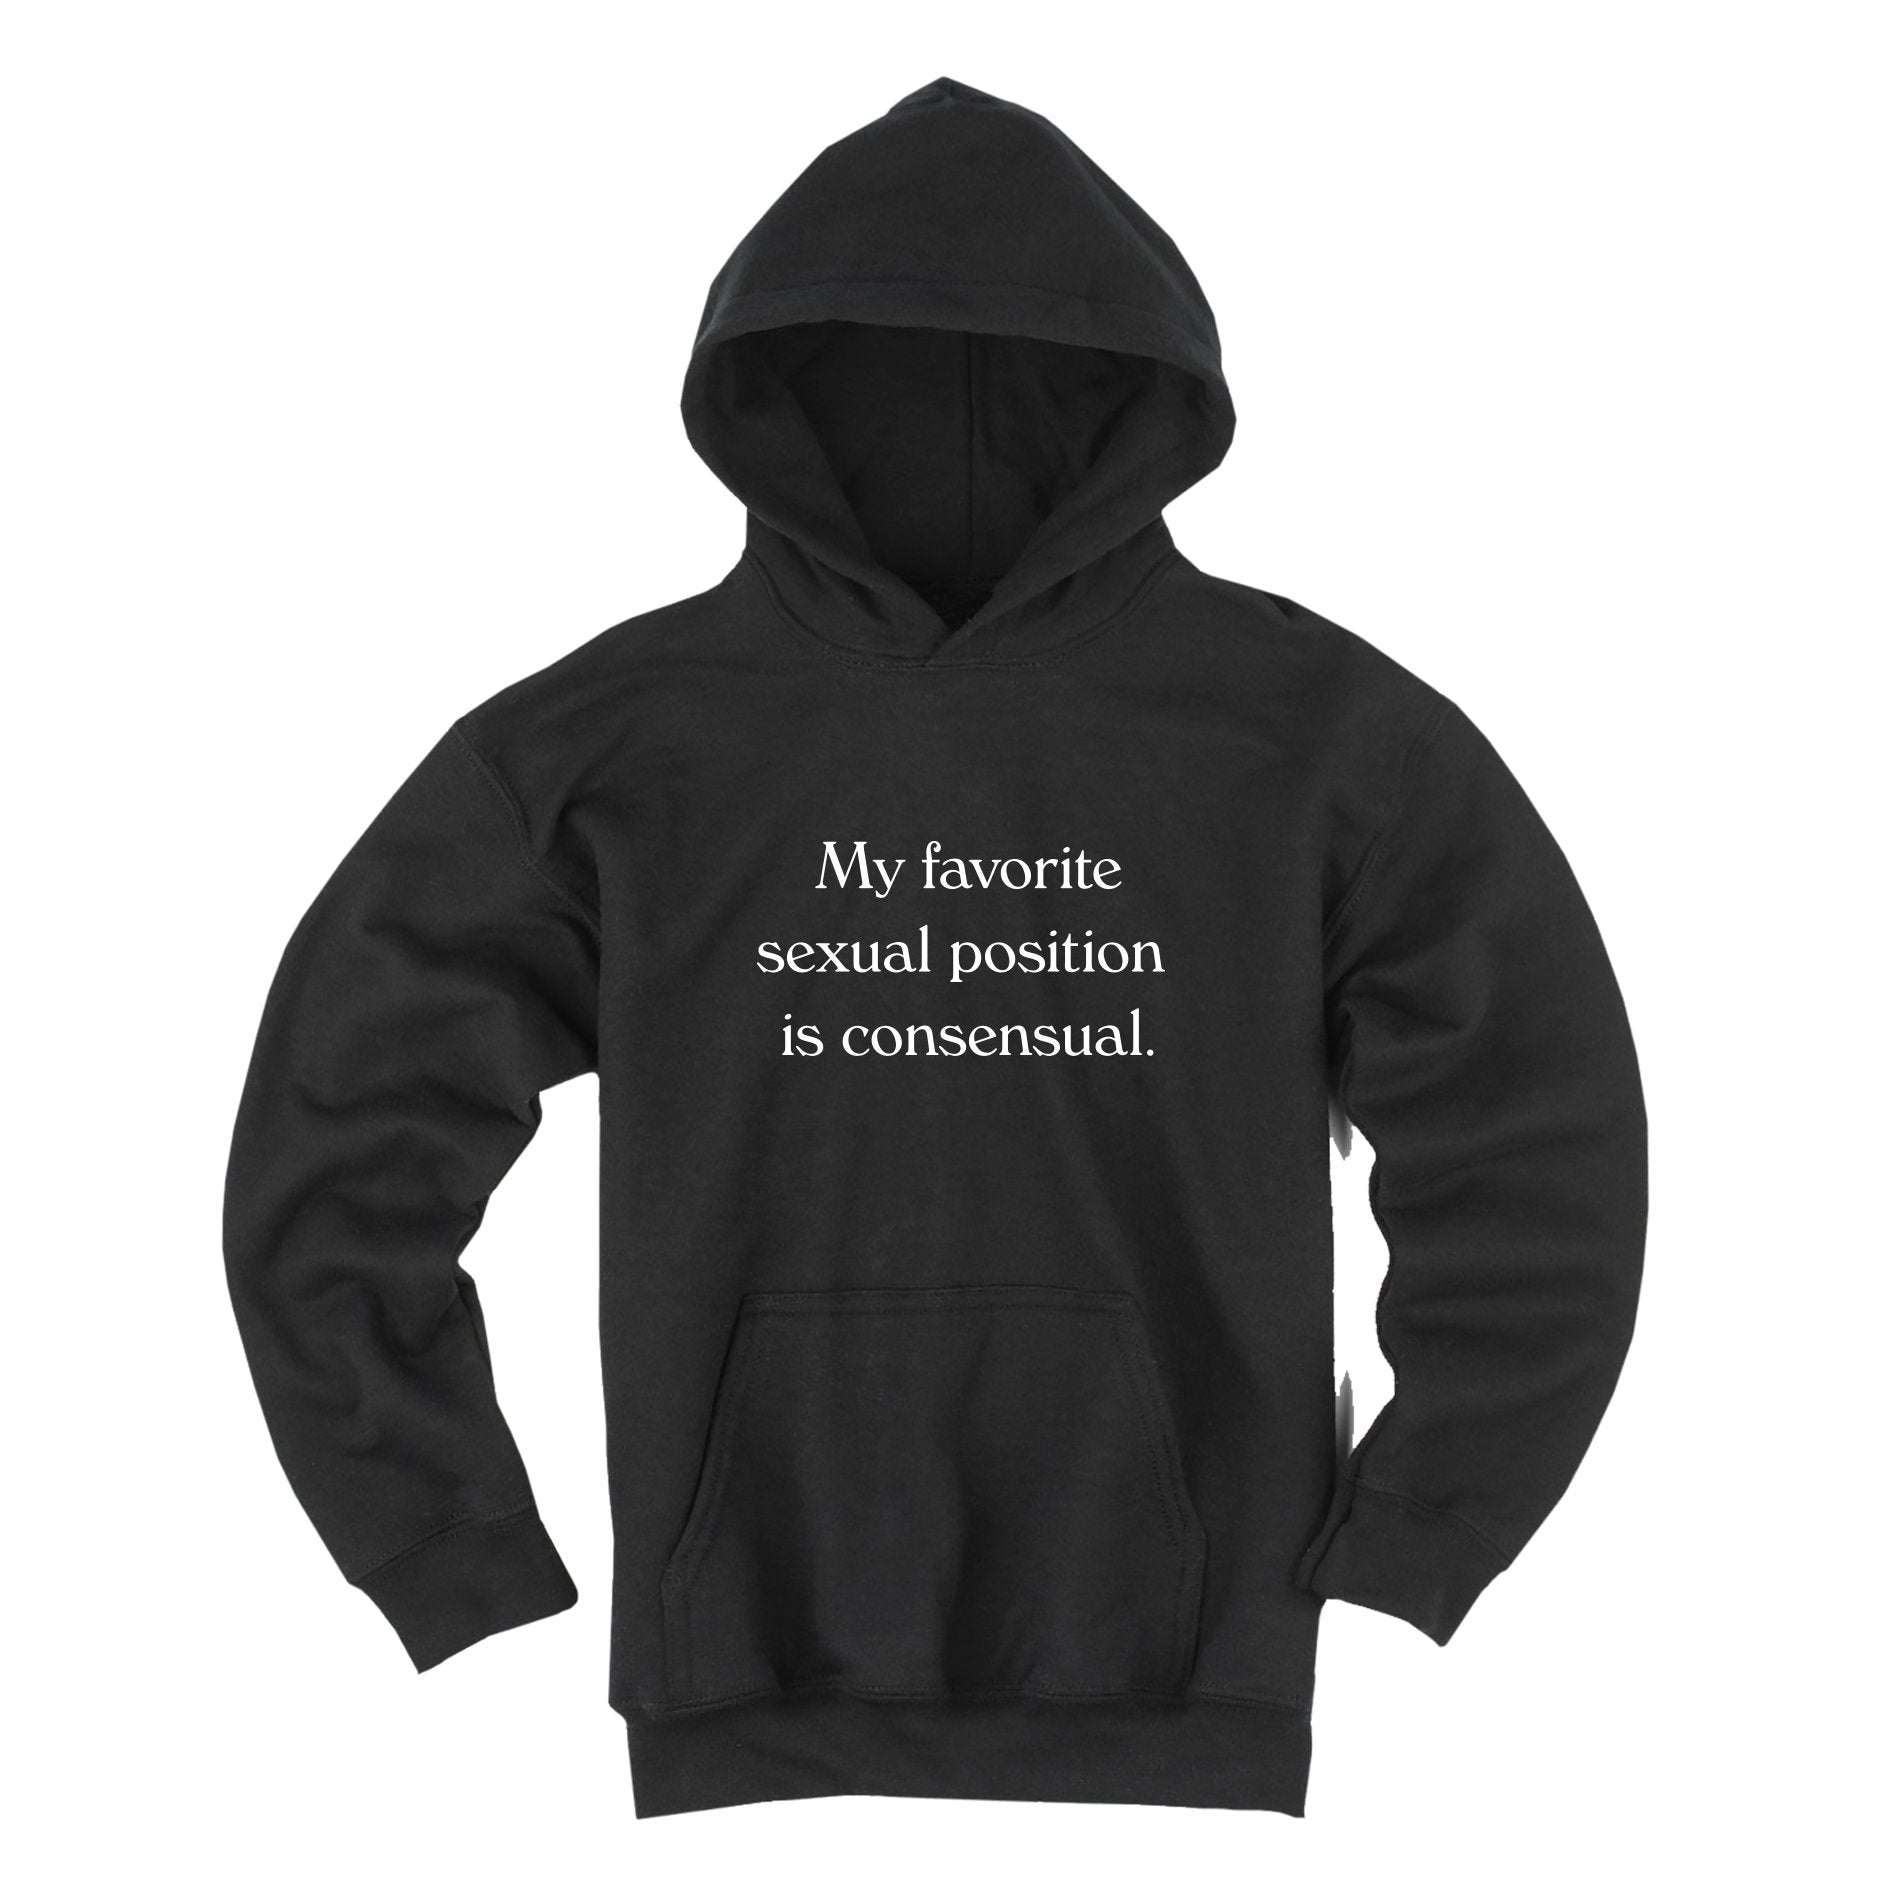 SEXUAL POSITION HOODIE [BLACK TEXT]